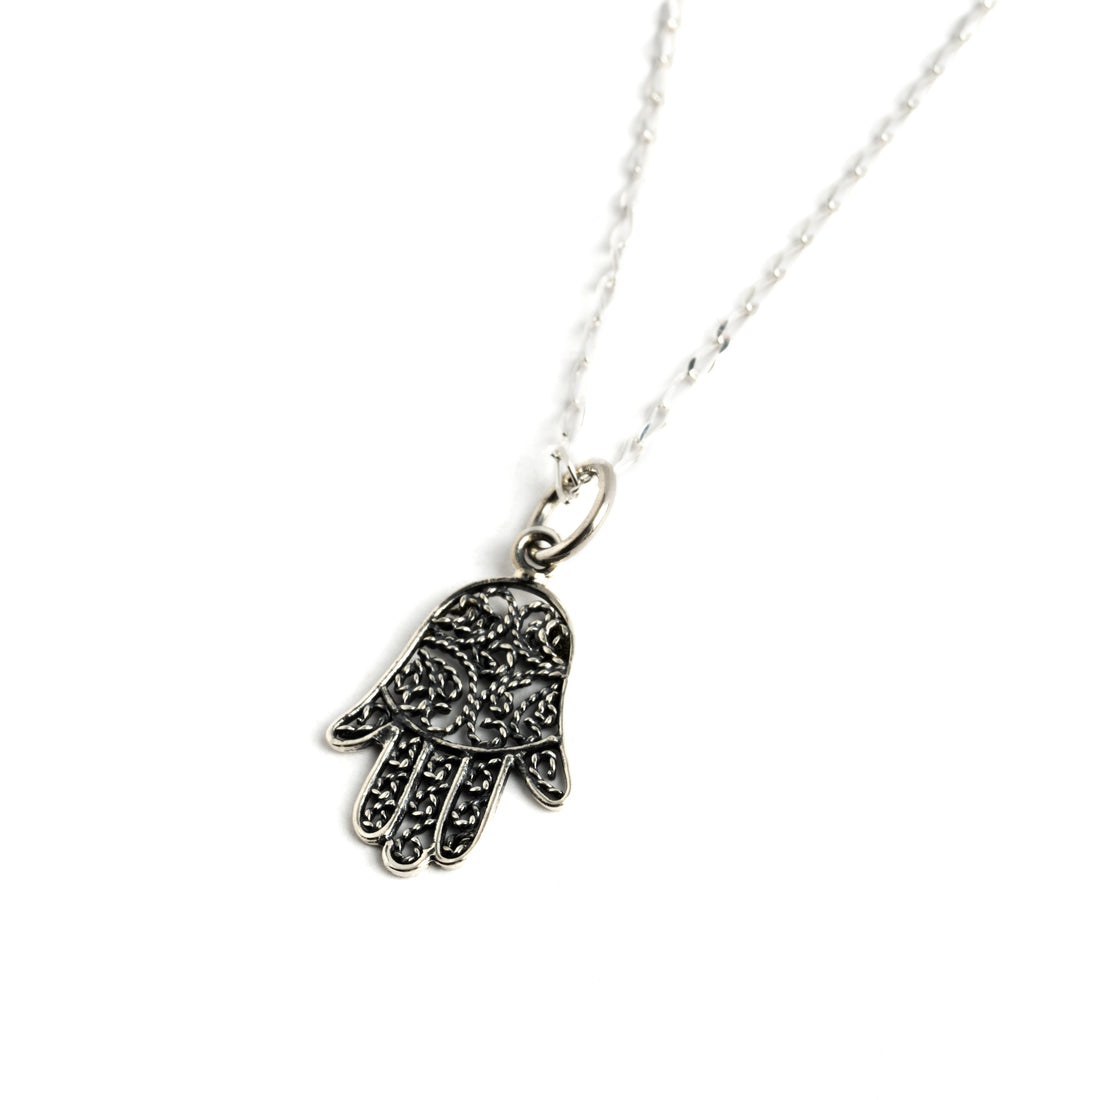 Tiny Silver Hamsa Charm necklace right side view